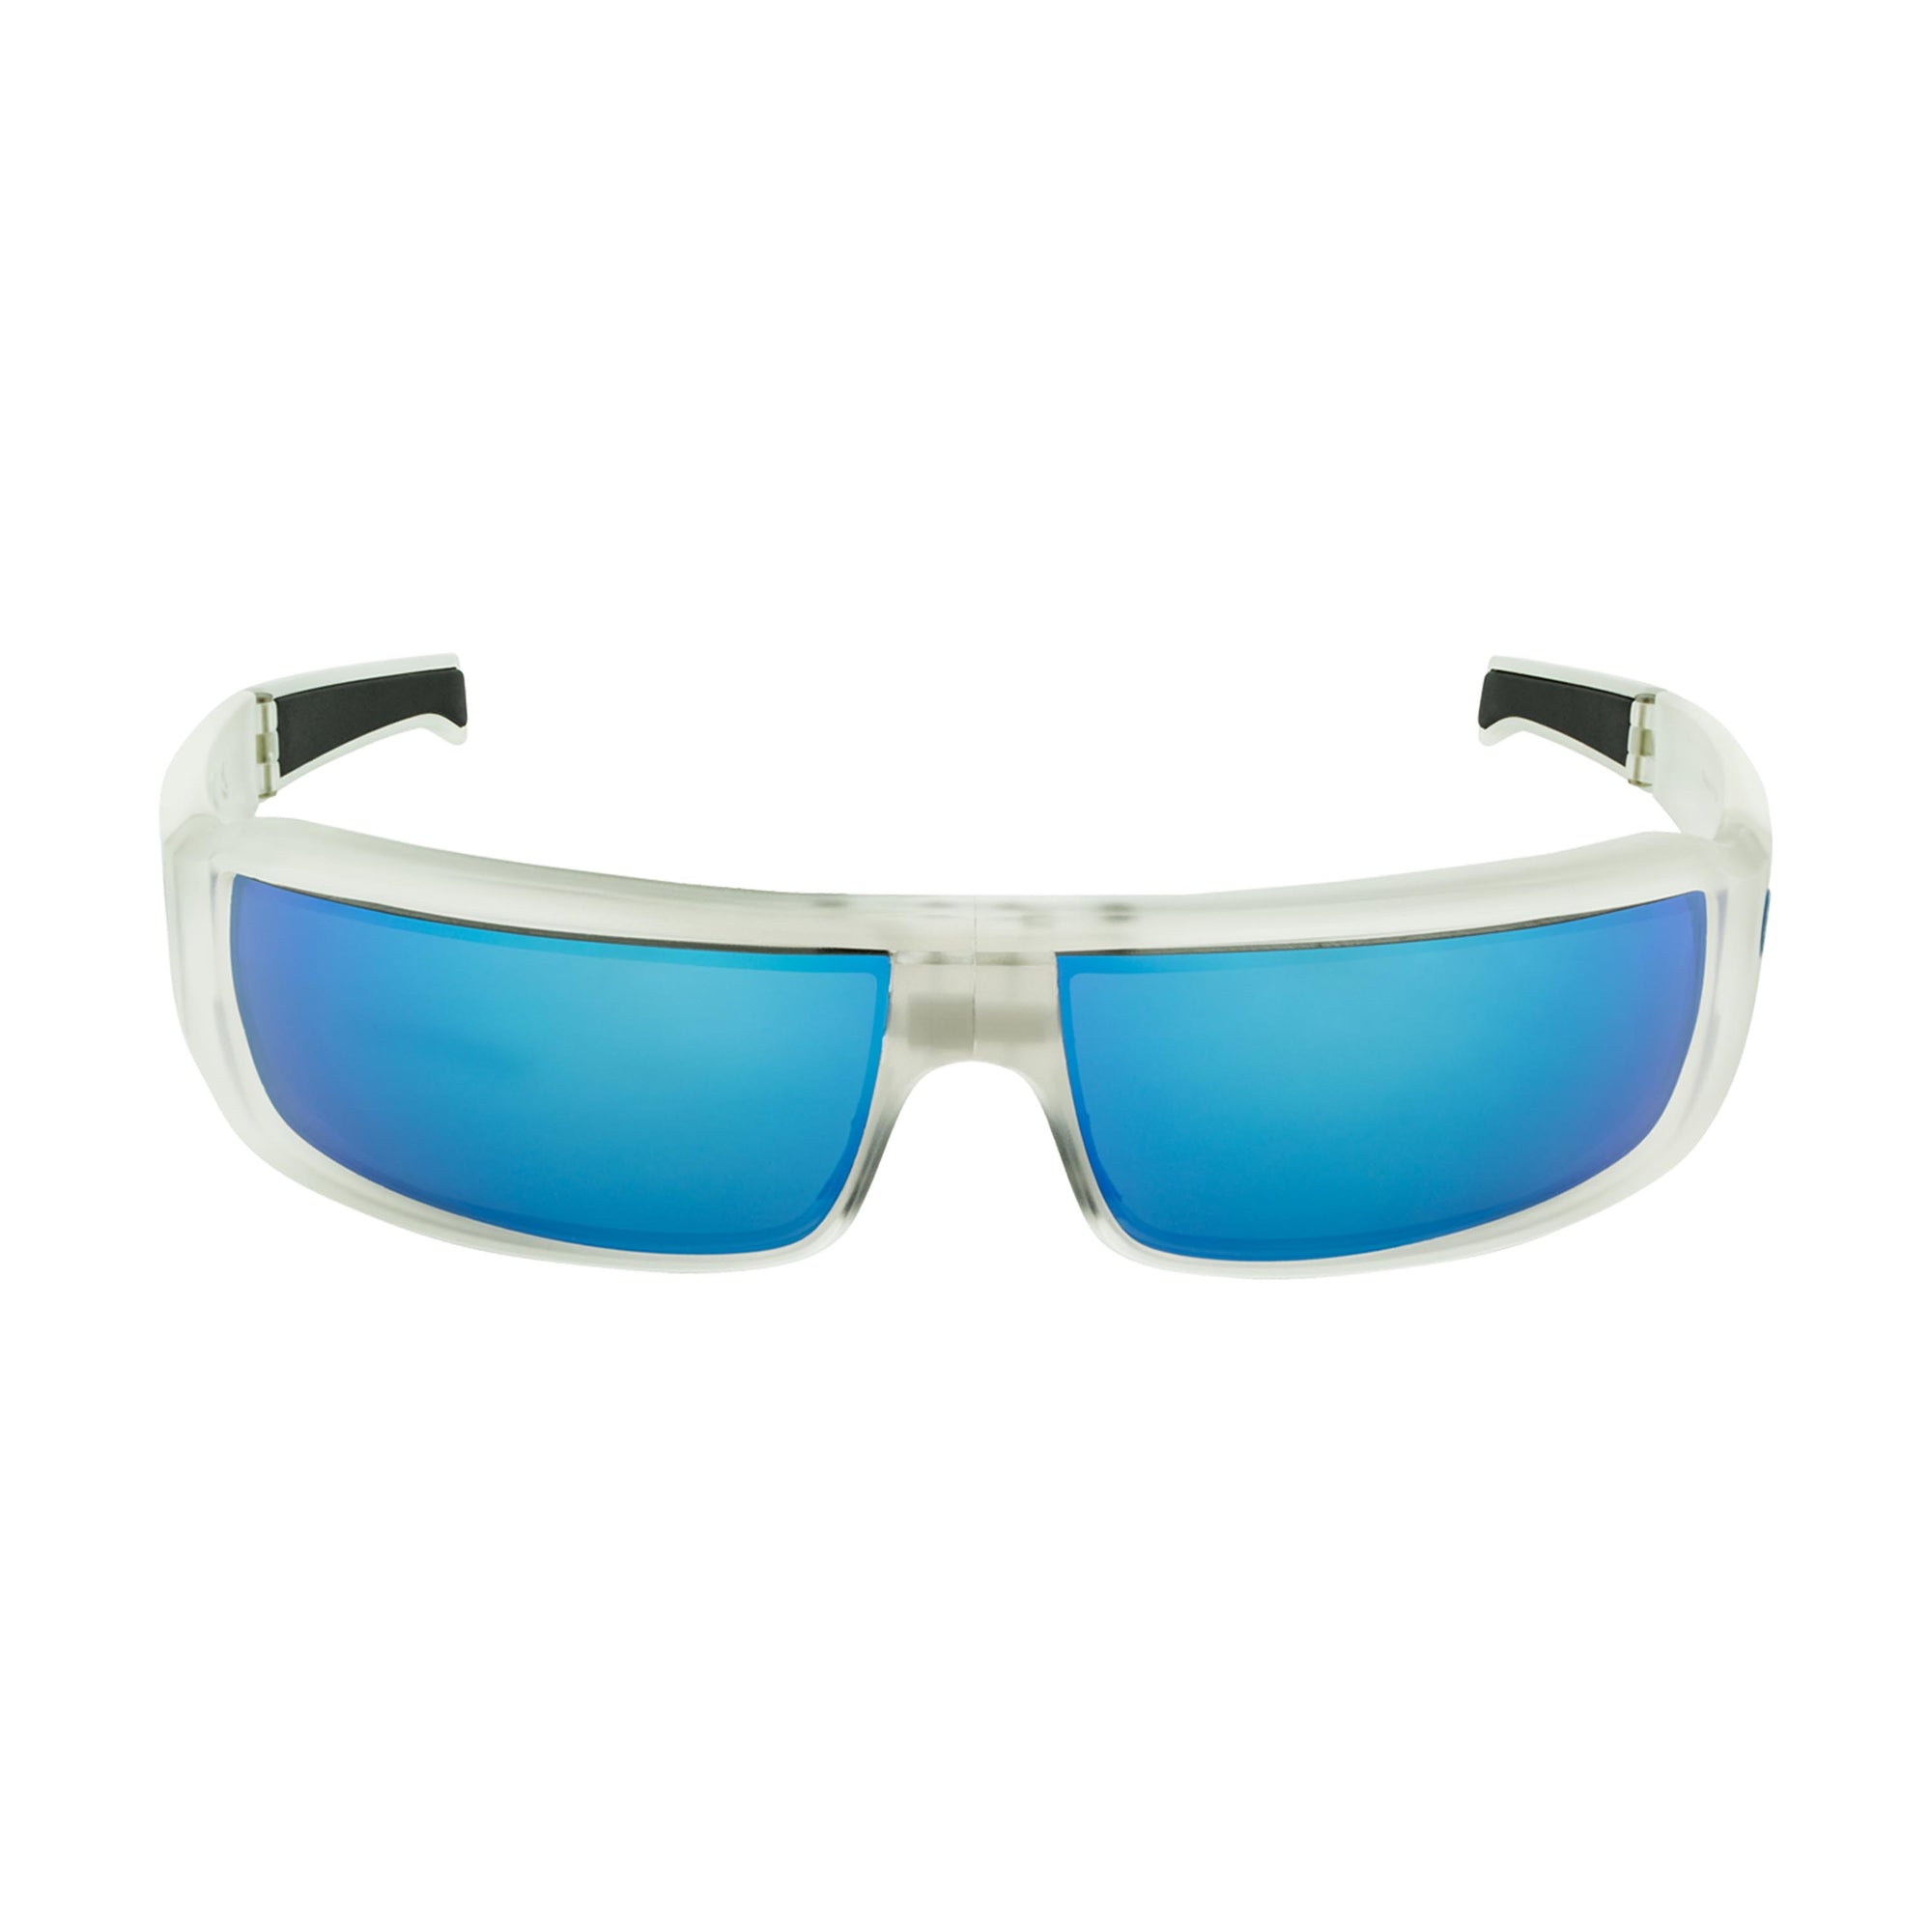 Popticals, Premium Compact Sunglasses, PopSign, 010020-XYUN, Polarized Sunglasses, Matte Crystal Frame, Gray Lenses w/Blue Mirror Finish, Front View